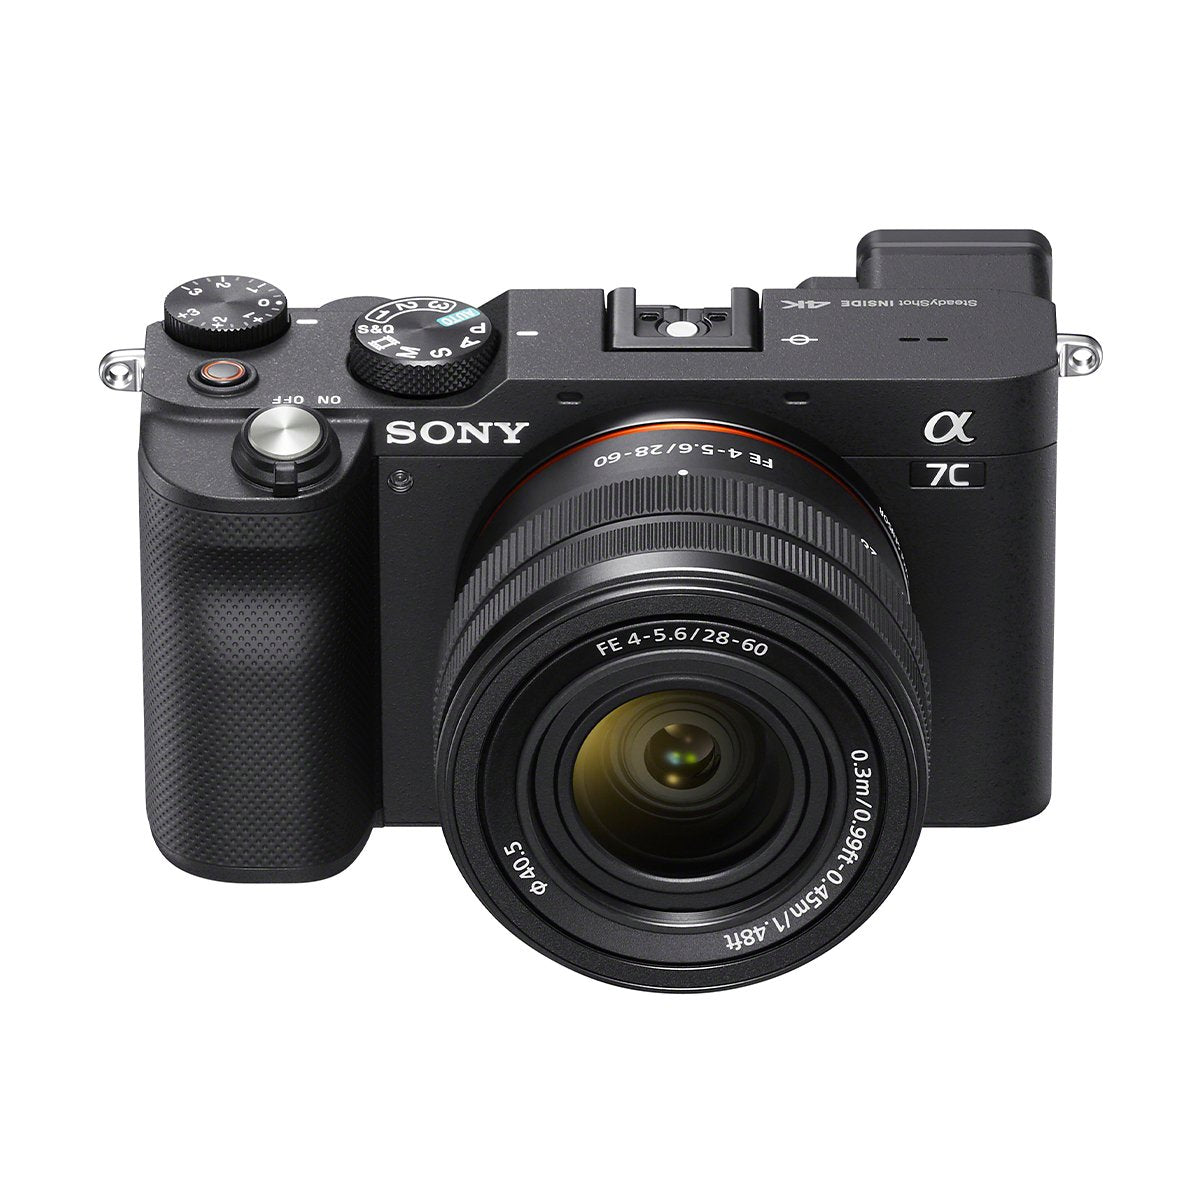 Sony Alpha a7C Full Frame Mirrorless Camera with FE 28-60mm f/4-5.6 Lens (Black) *OPEN BOX*